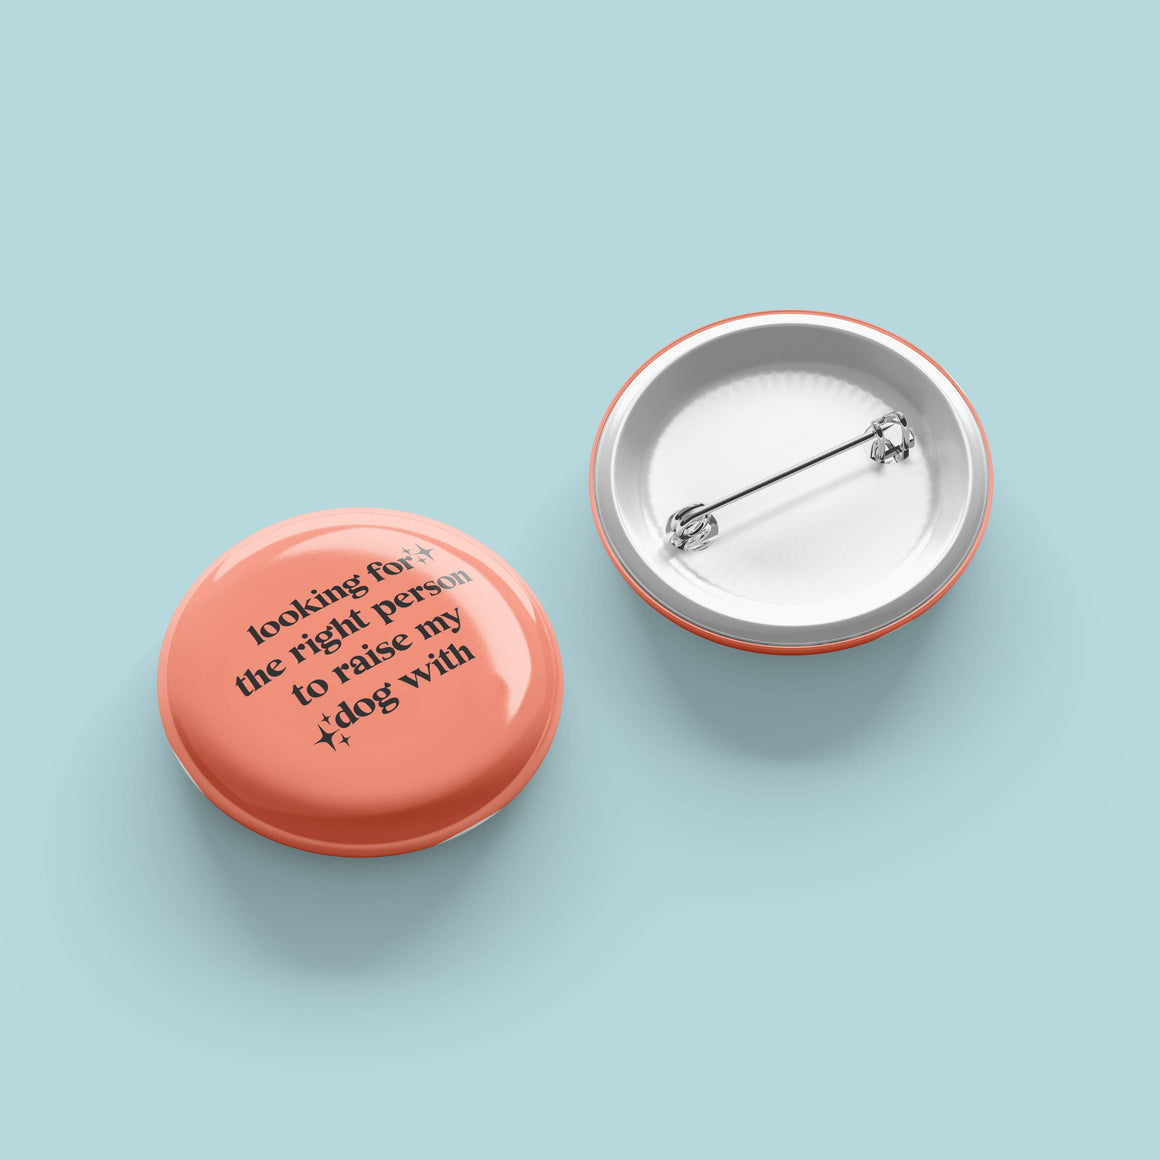 Looking for the Right Person...Pinback Button